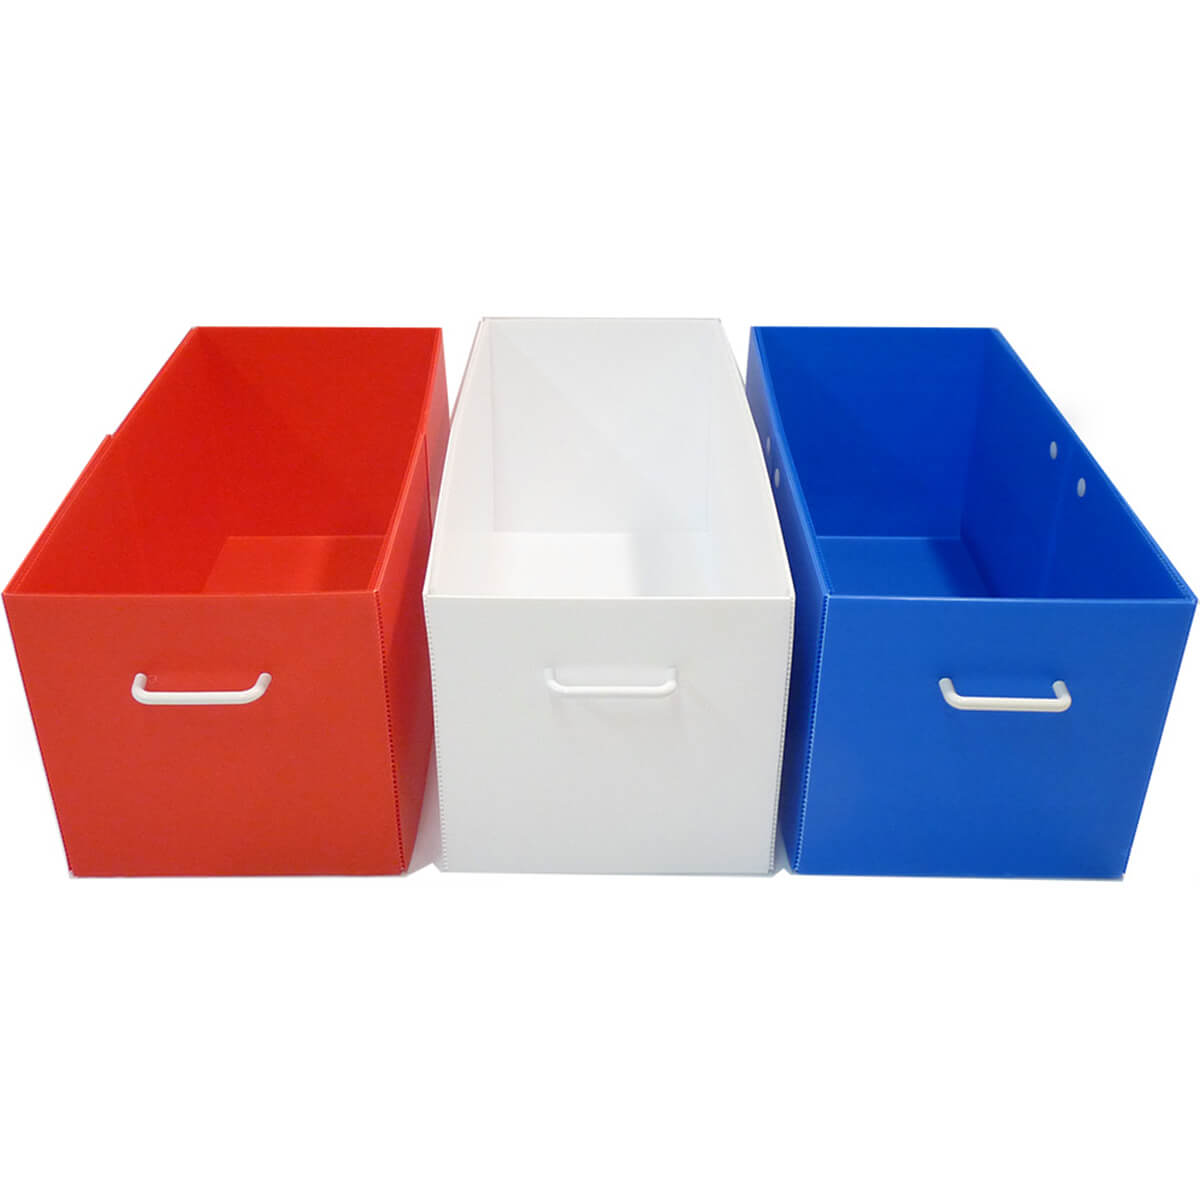 http://www.guineapigcagesstore.com/Shared/images/products/stands/redwhiteandbluebins.jpg